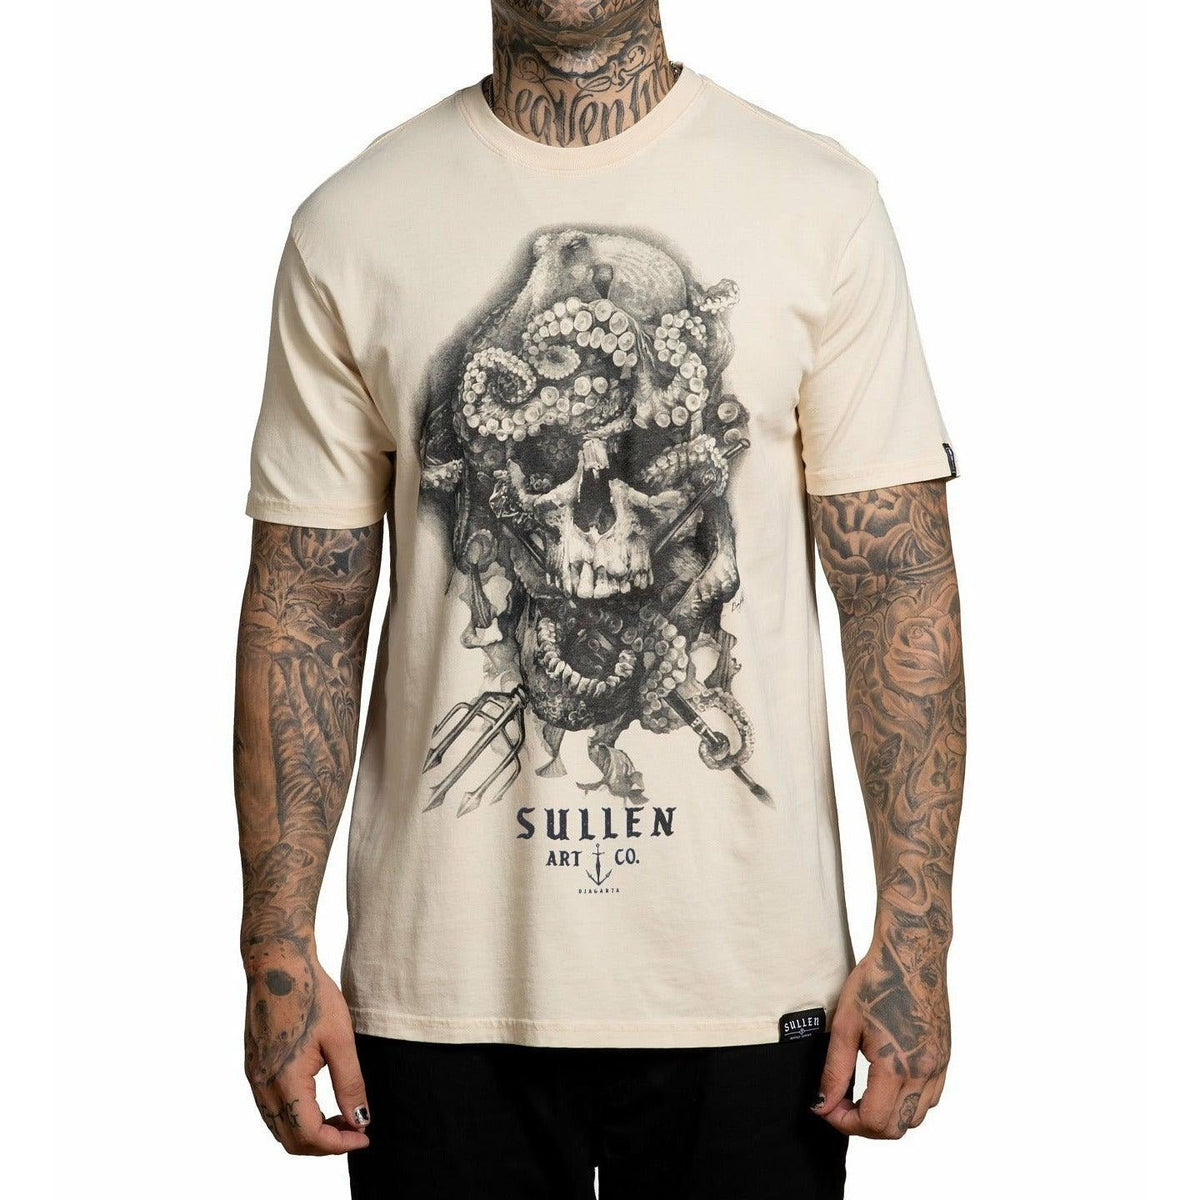 SULLEN-ART-COLLECTIVE-CLOTHING-NEPTUNE-SS-TEE - T-SHIRT - Synik Clothing - synikclothing.com